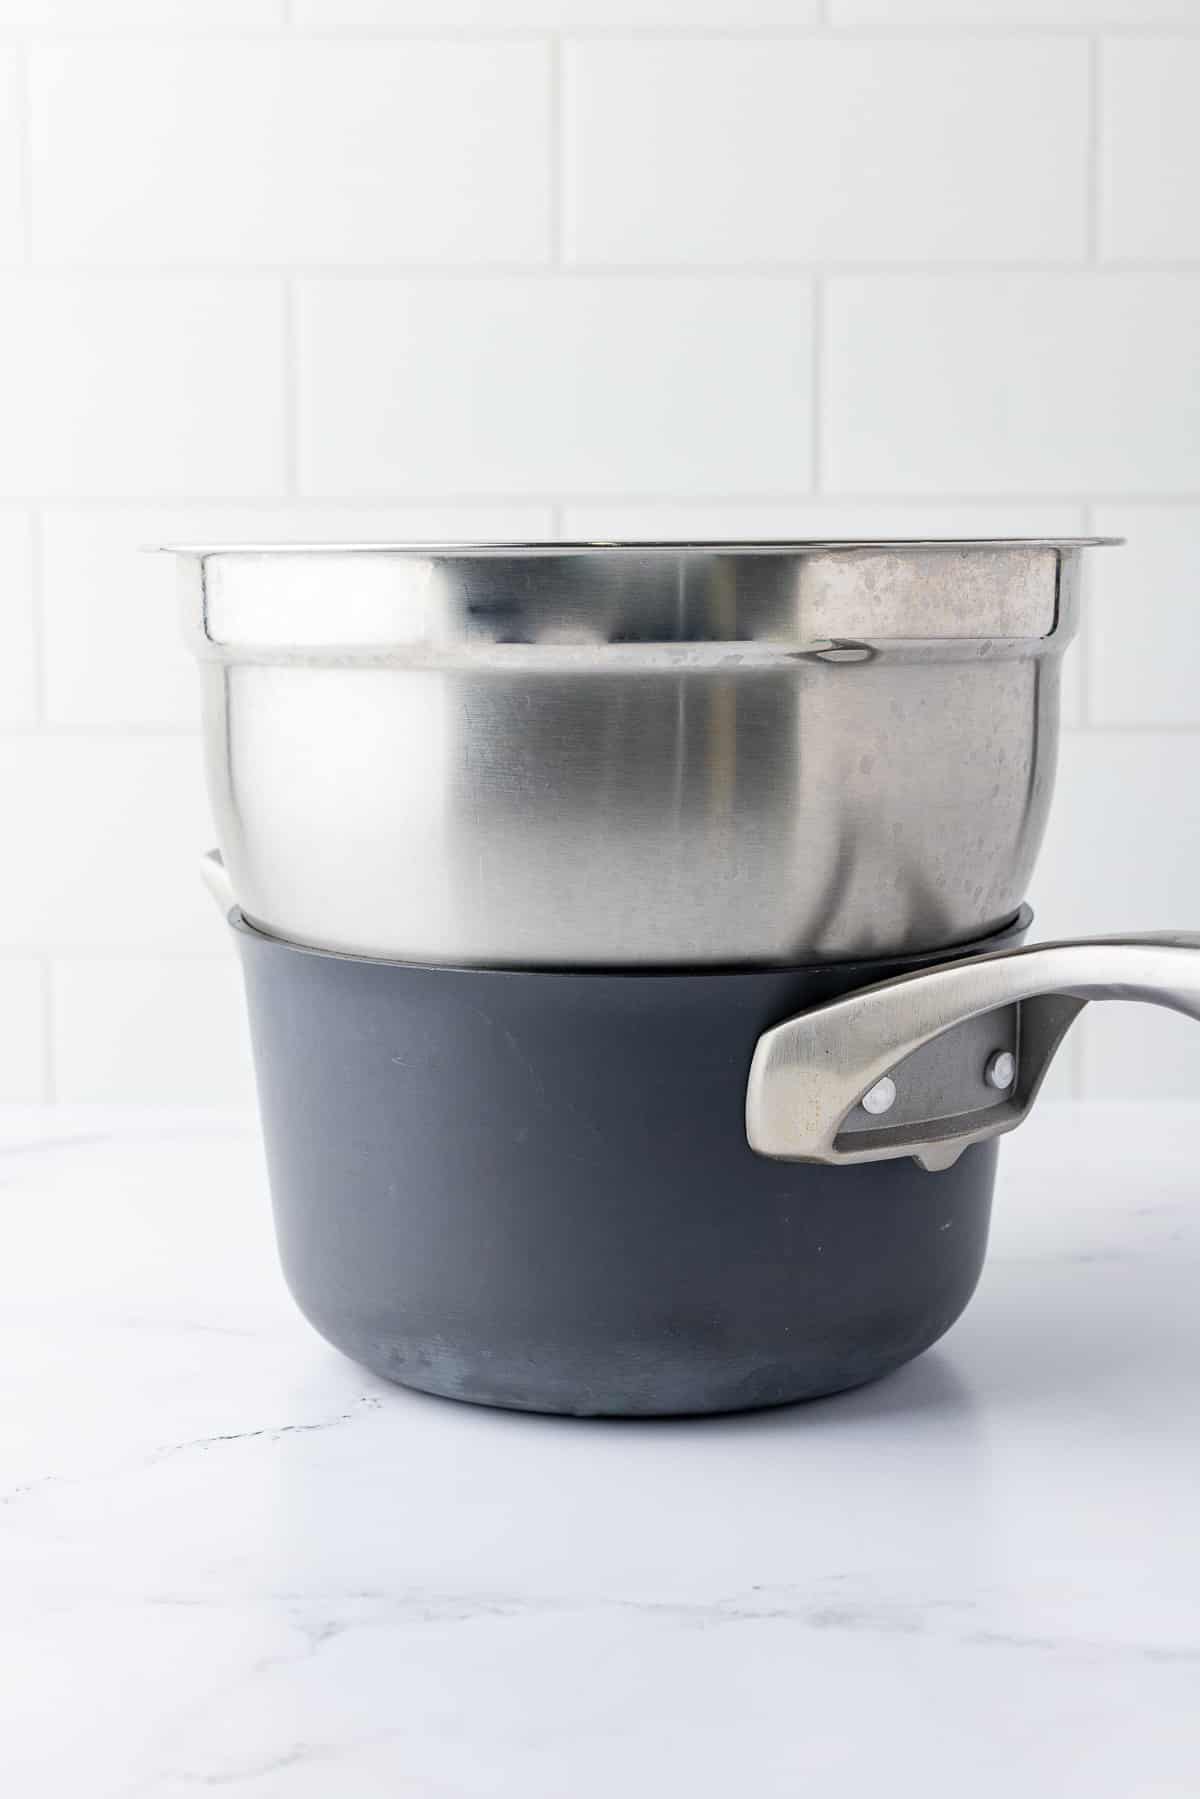 A stainless steel bowl sitting inside a saucepan.